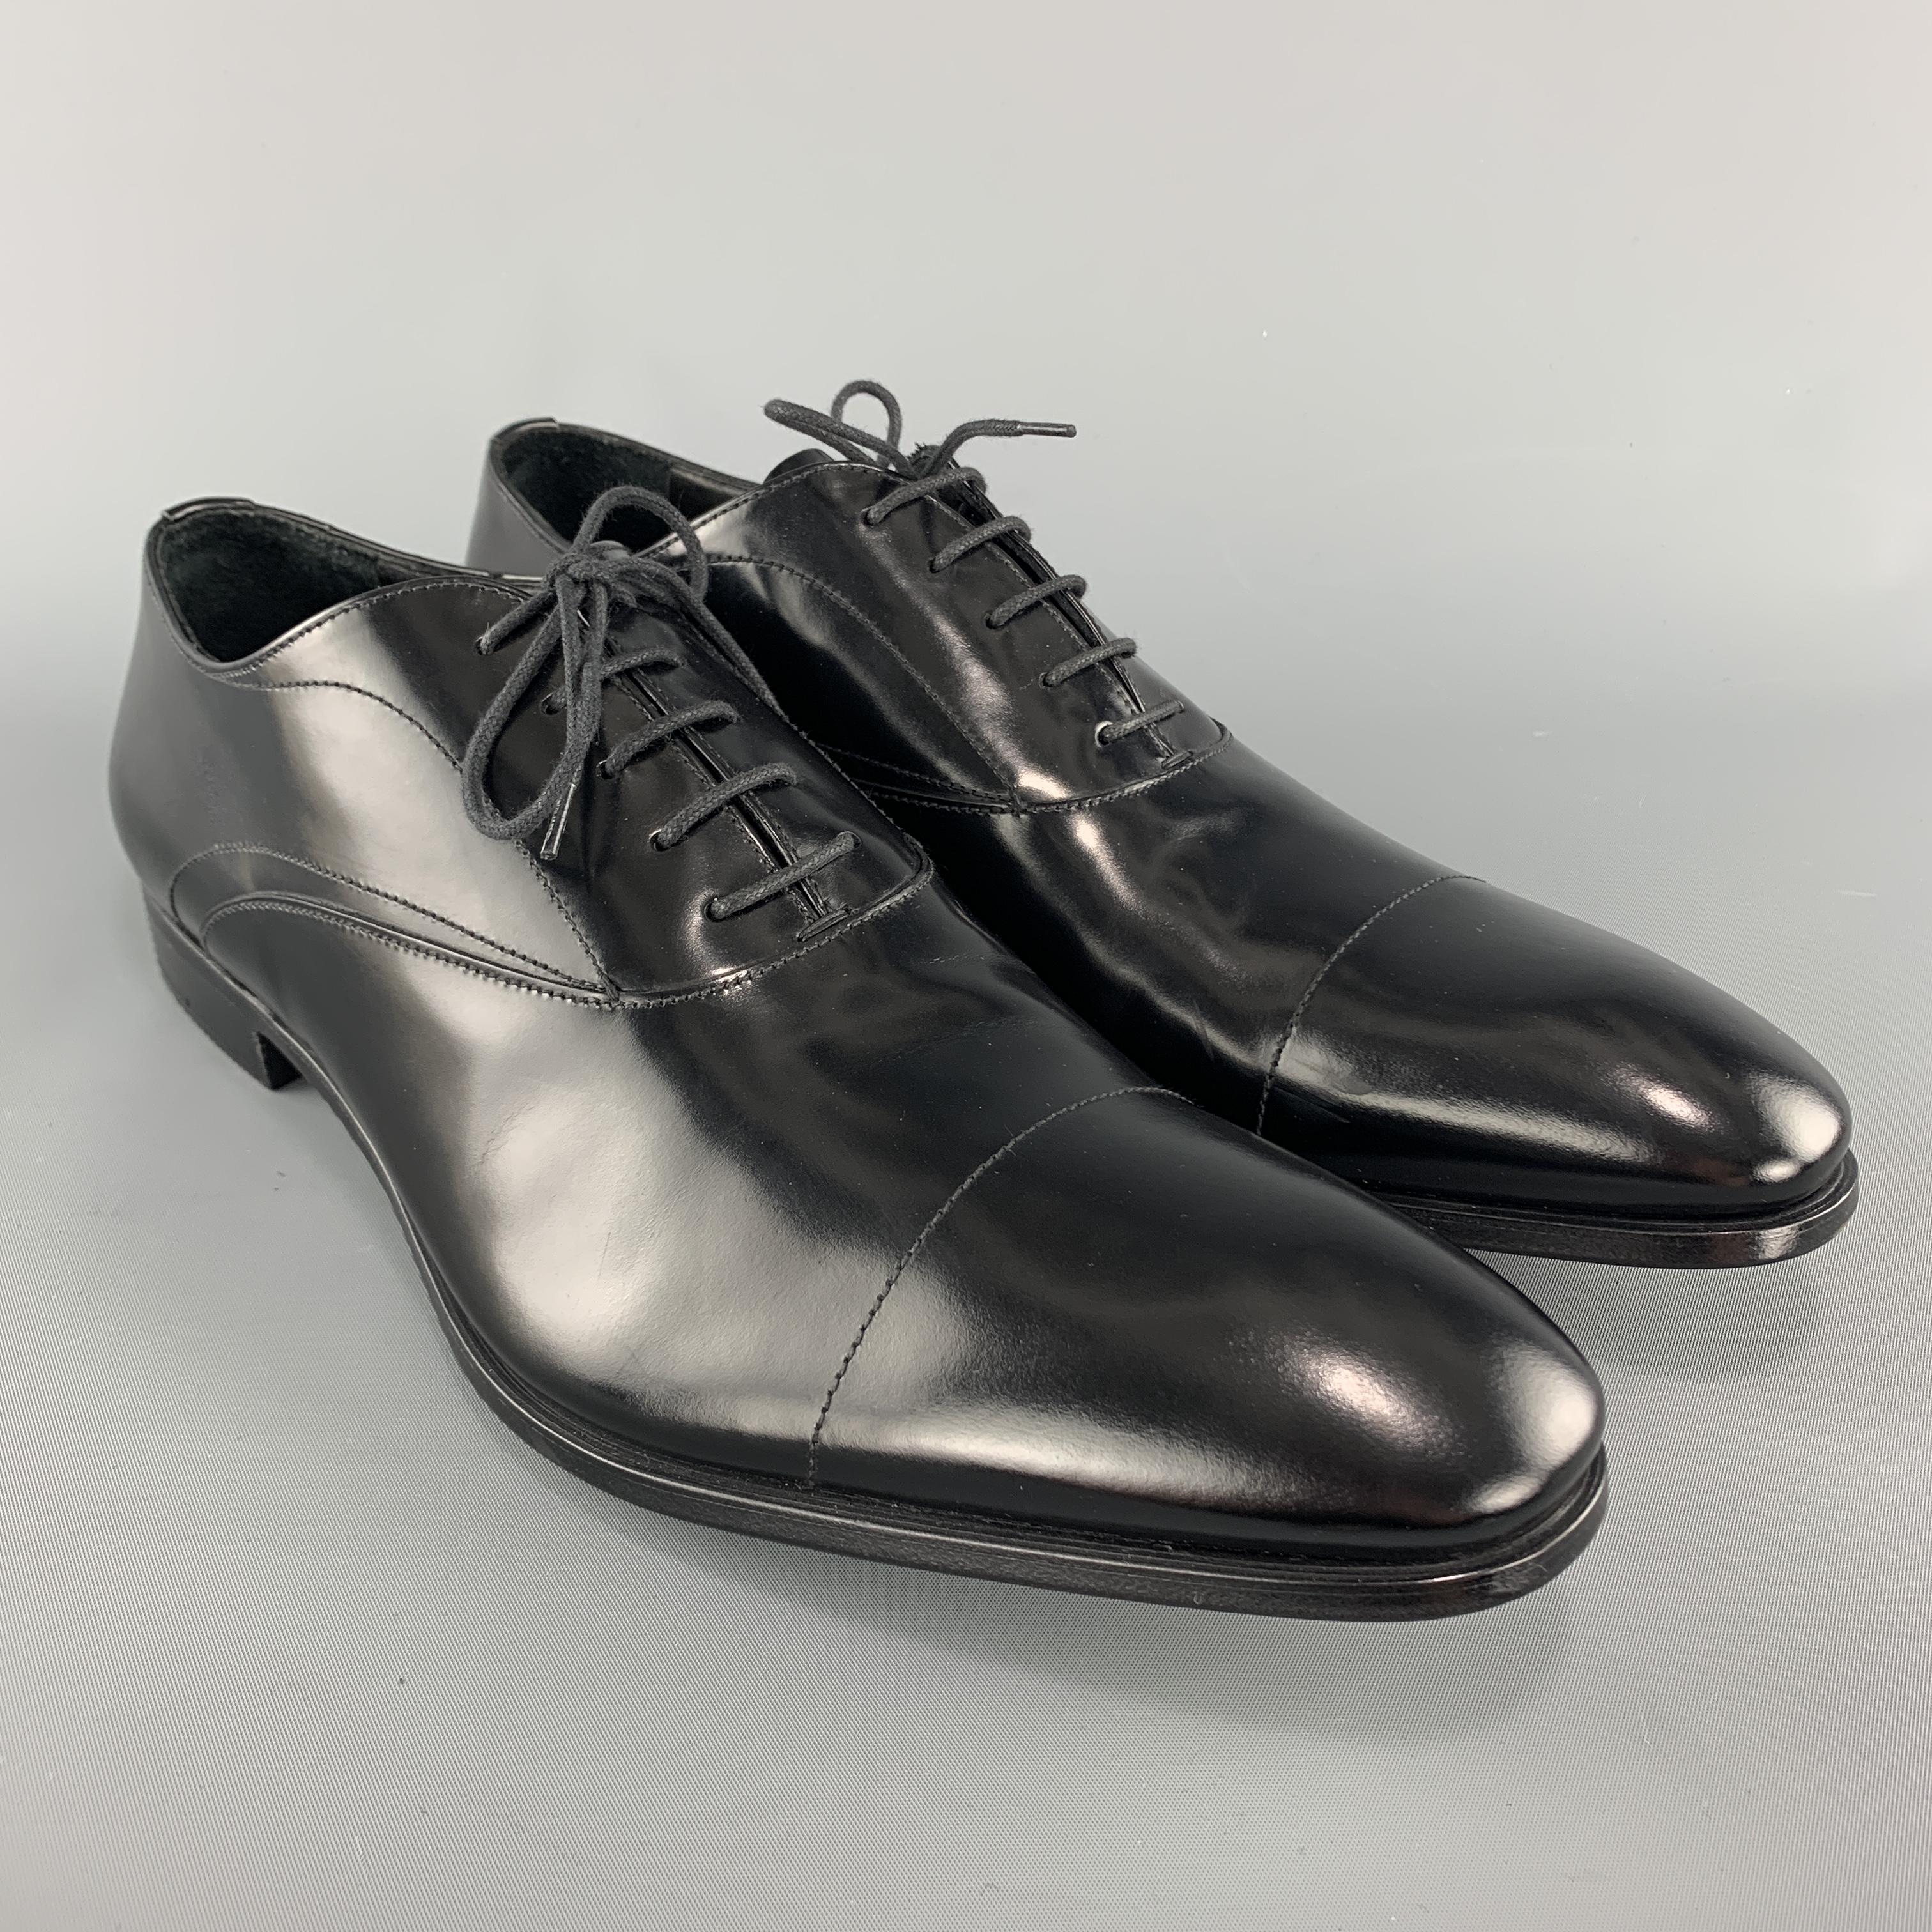 PRADA dress shoes come in polished black leather with a pointed cap toe. Never worn. Made in Italy.

Brand New. 
Marked: UK 10.5

Outsole: 12.75 x 4.25 in. 